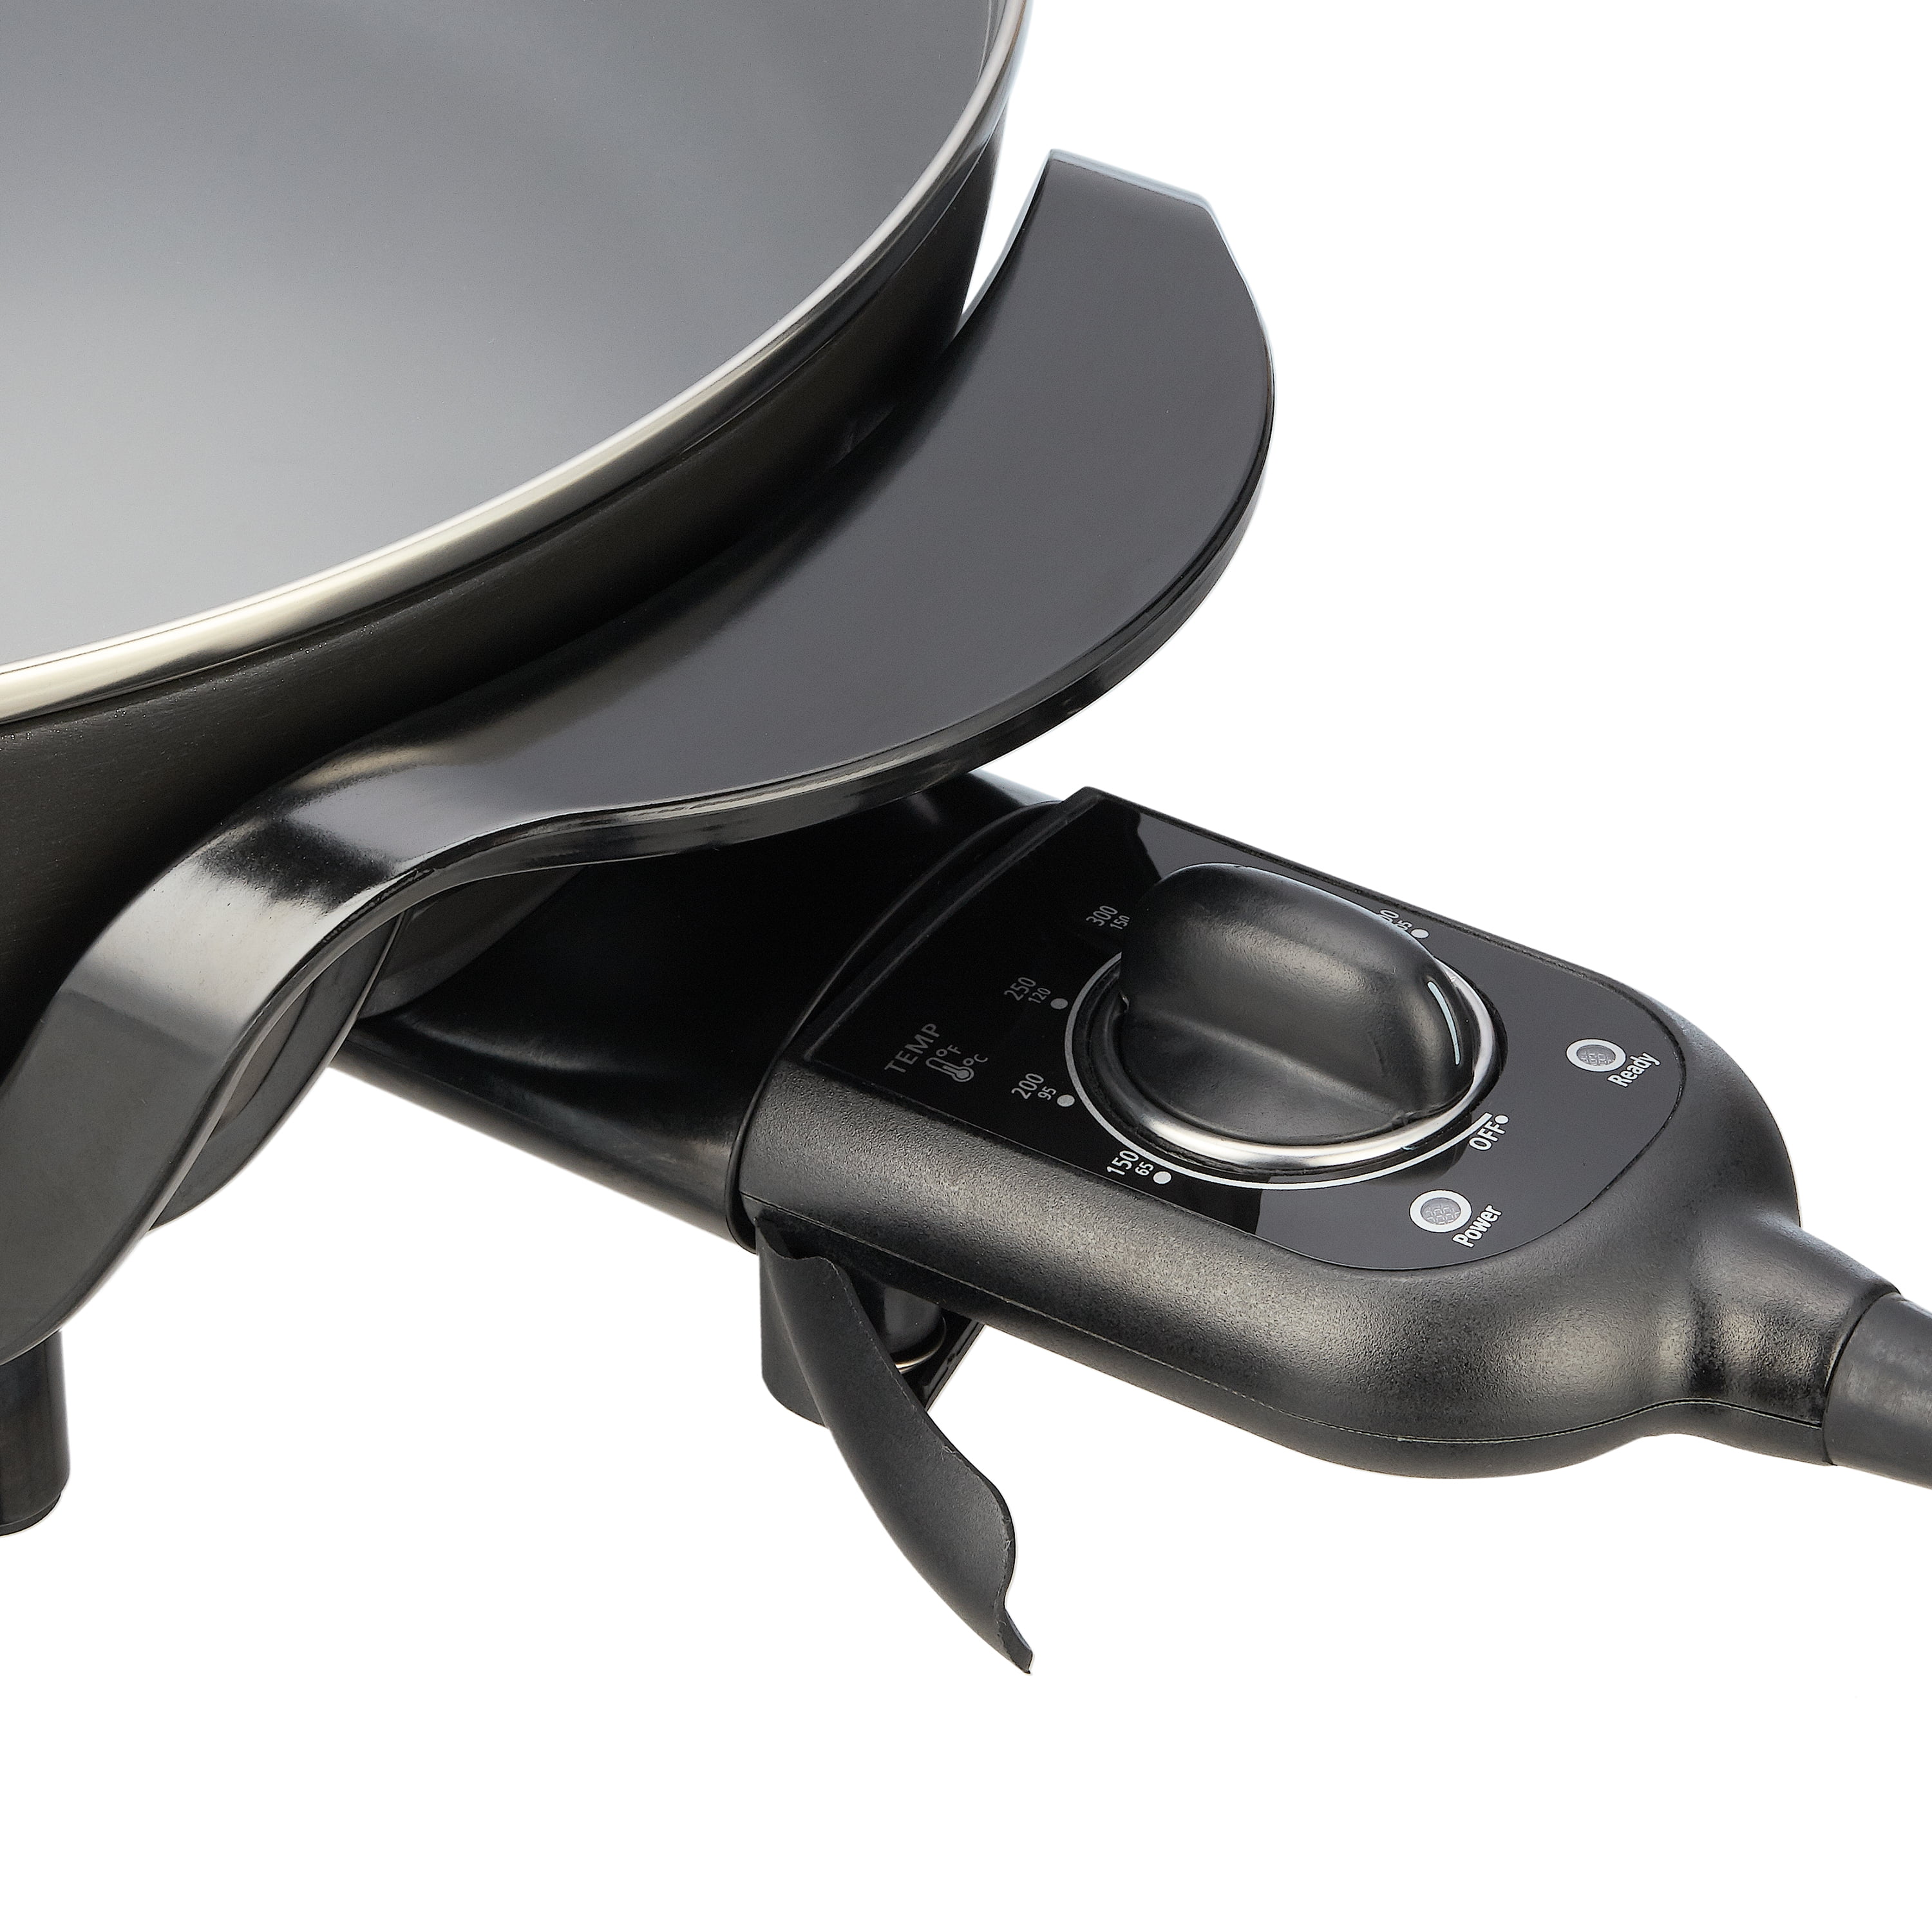 Mainstays 12" Round Nonstick Electric Skillet with Glass Cover